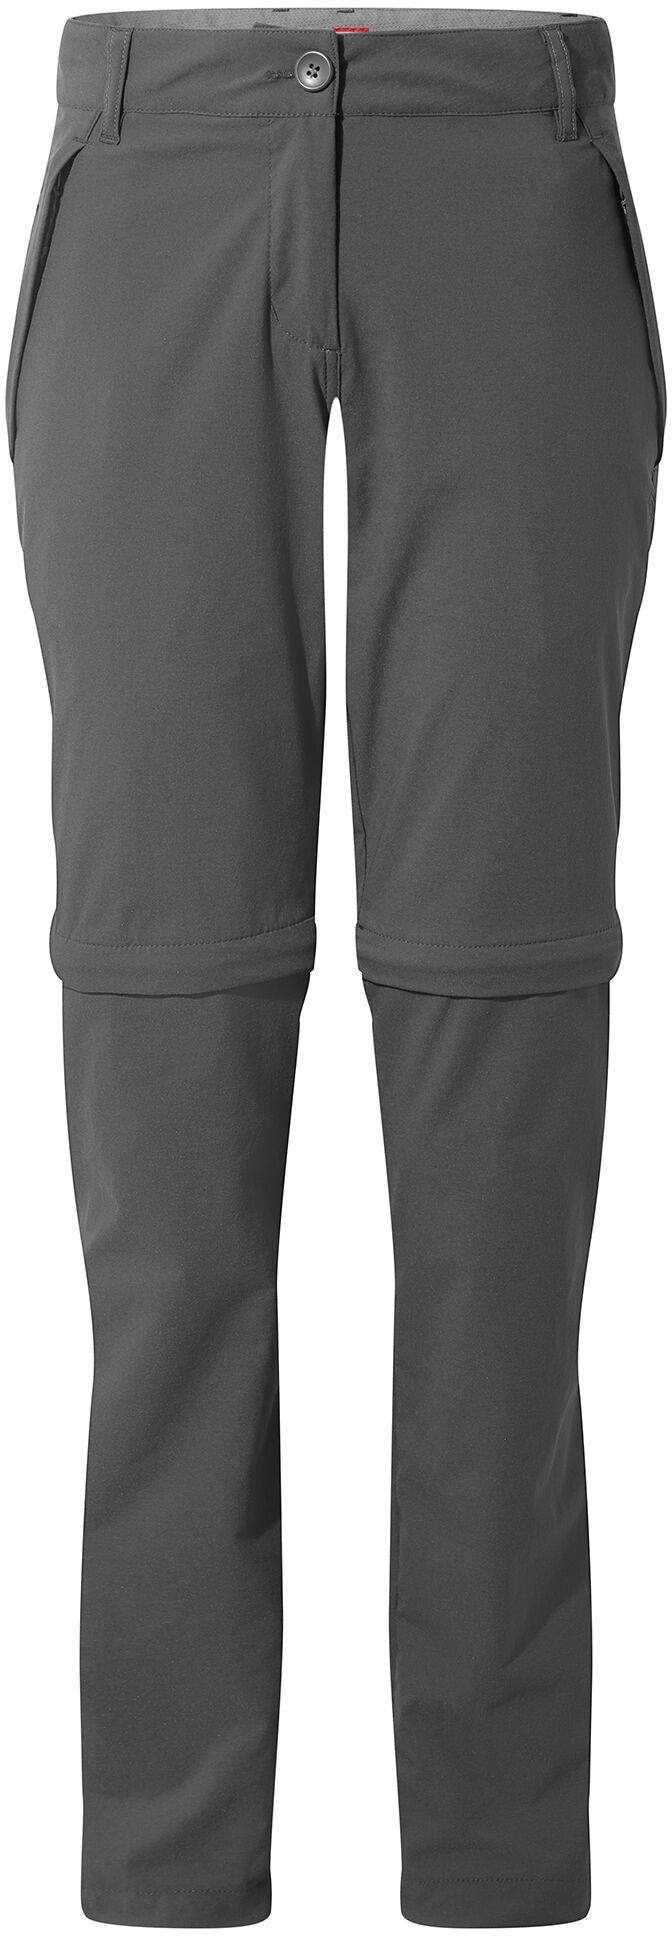 Craghoppers Women’s Nosilife Pro II Convertible Trousers